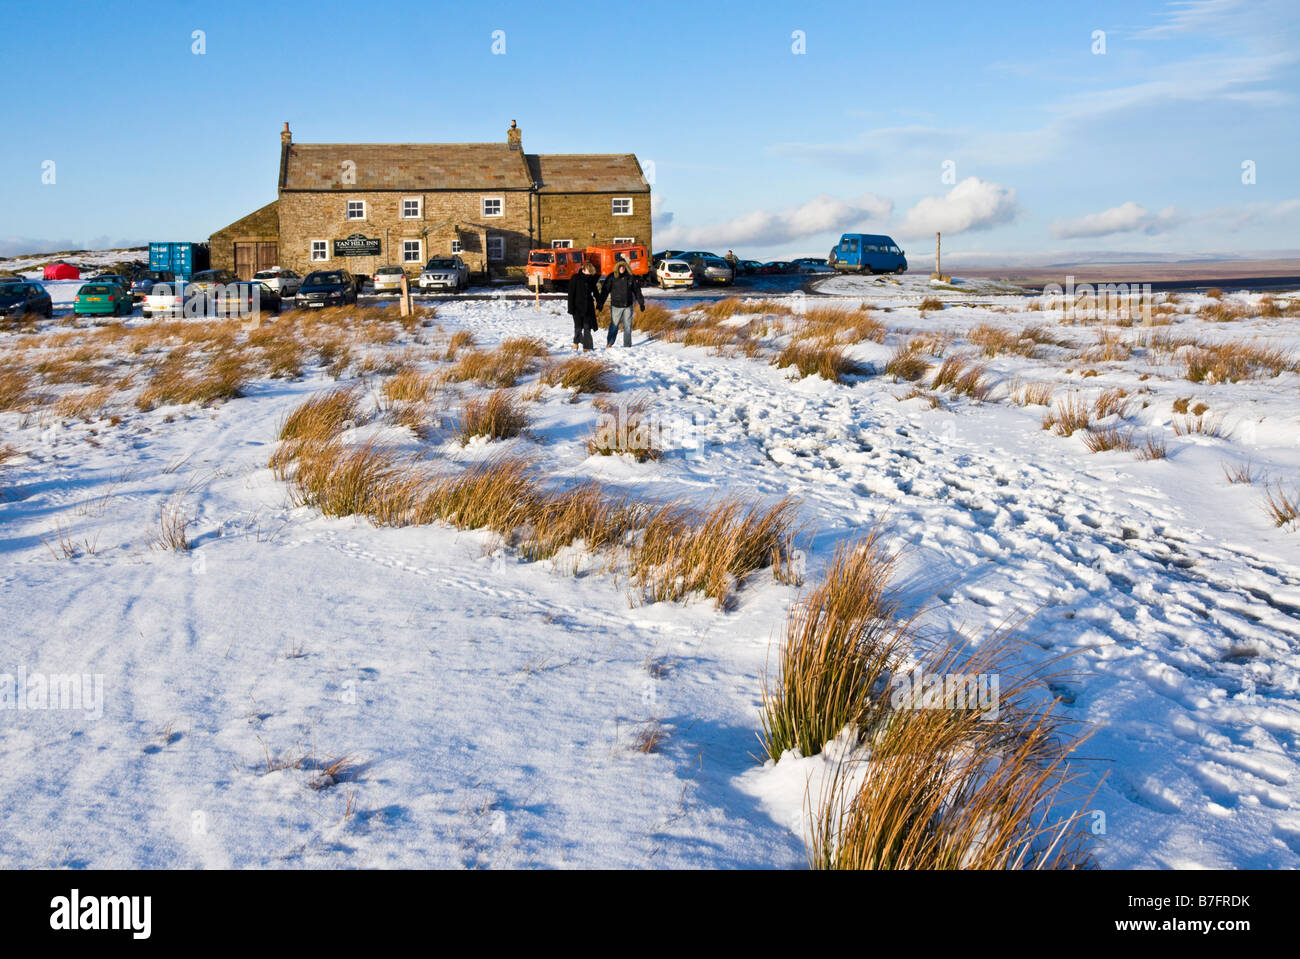 Tan Hill Inn in the Yorkshire Dales, photographed from the Pennine Way National Trail. Stock Photo